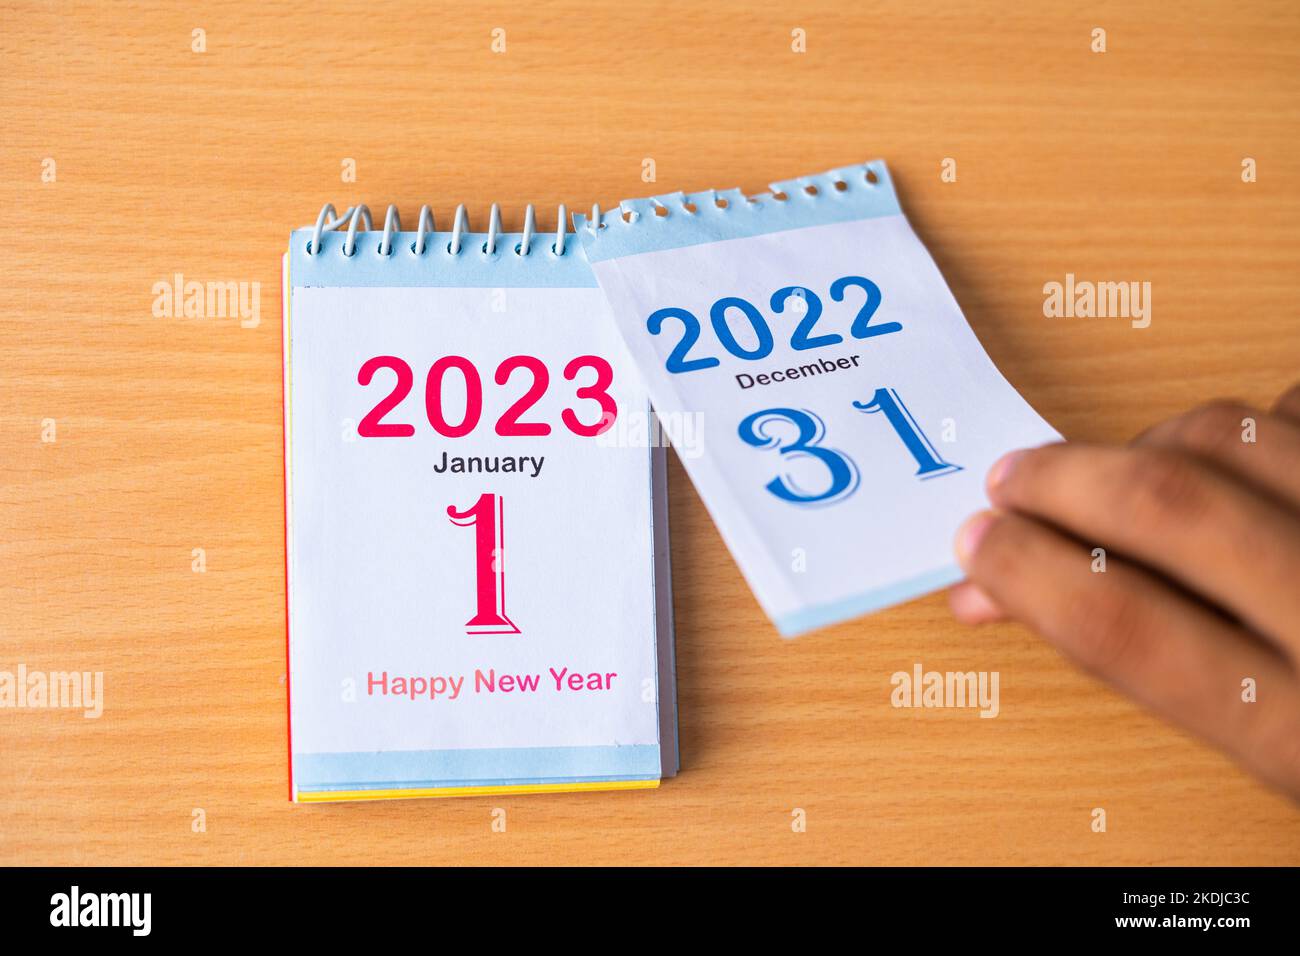 Close up shot of hands changing calendar to New Year 2023 by removing 2022 - concept of new beginnings Stock Photo